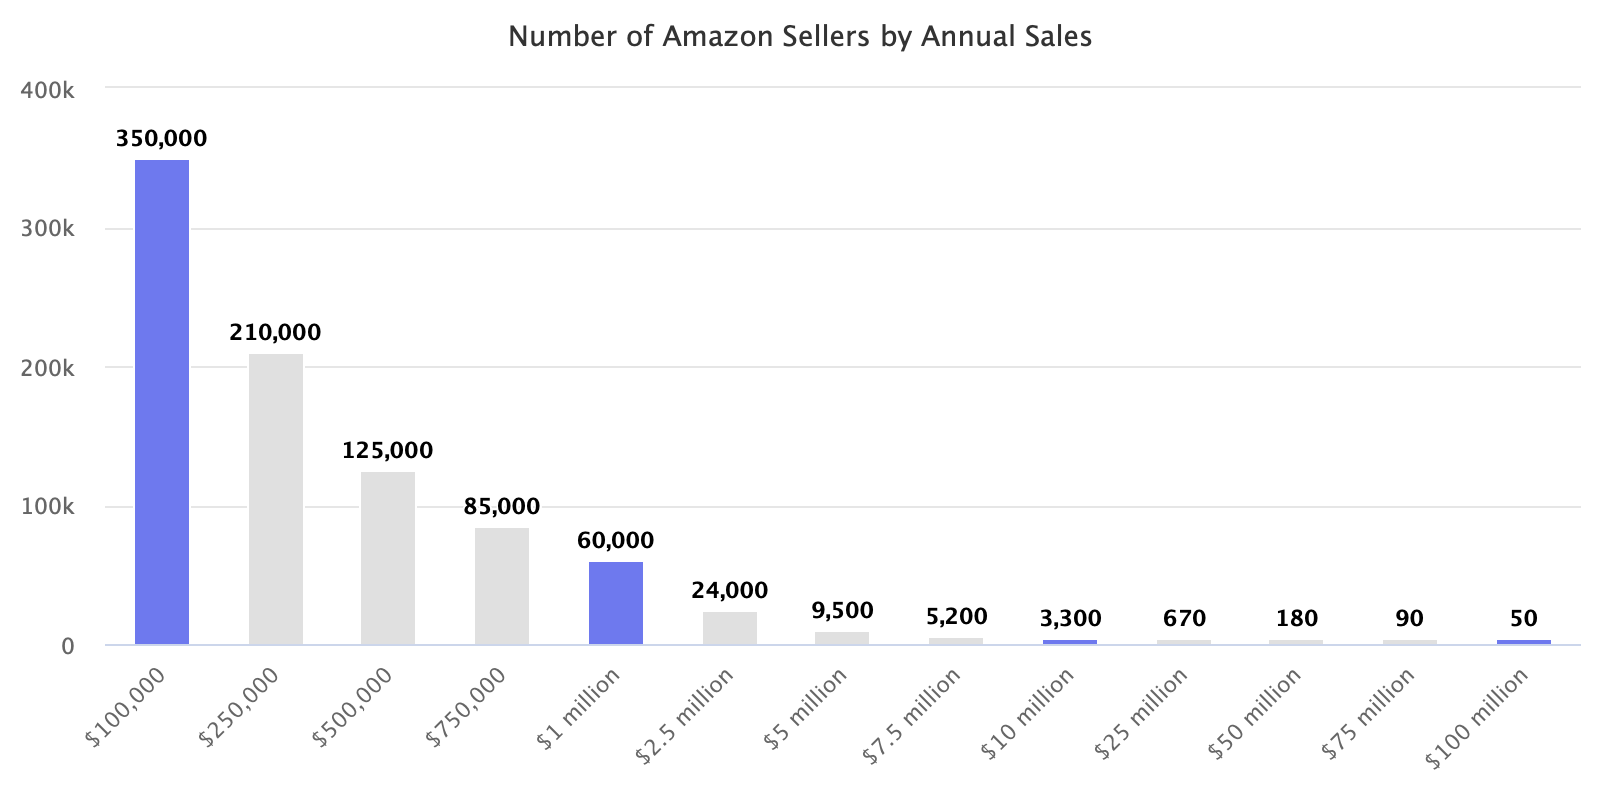 Number of Amazon Sellers by Annual Sales